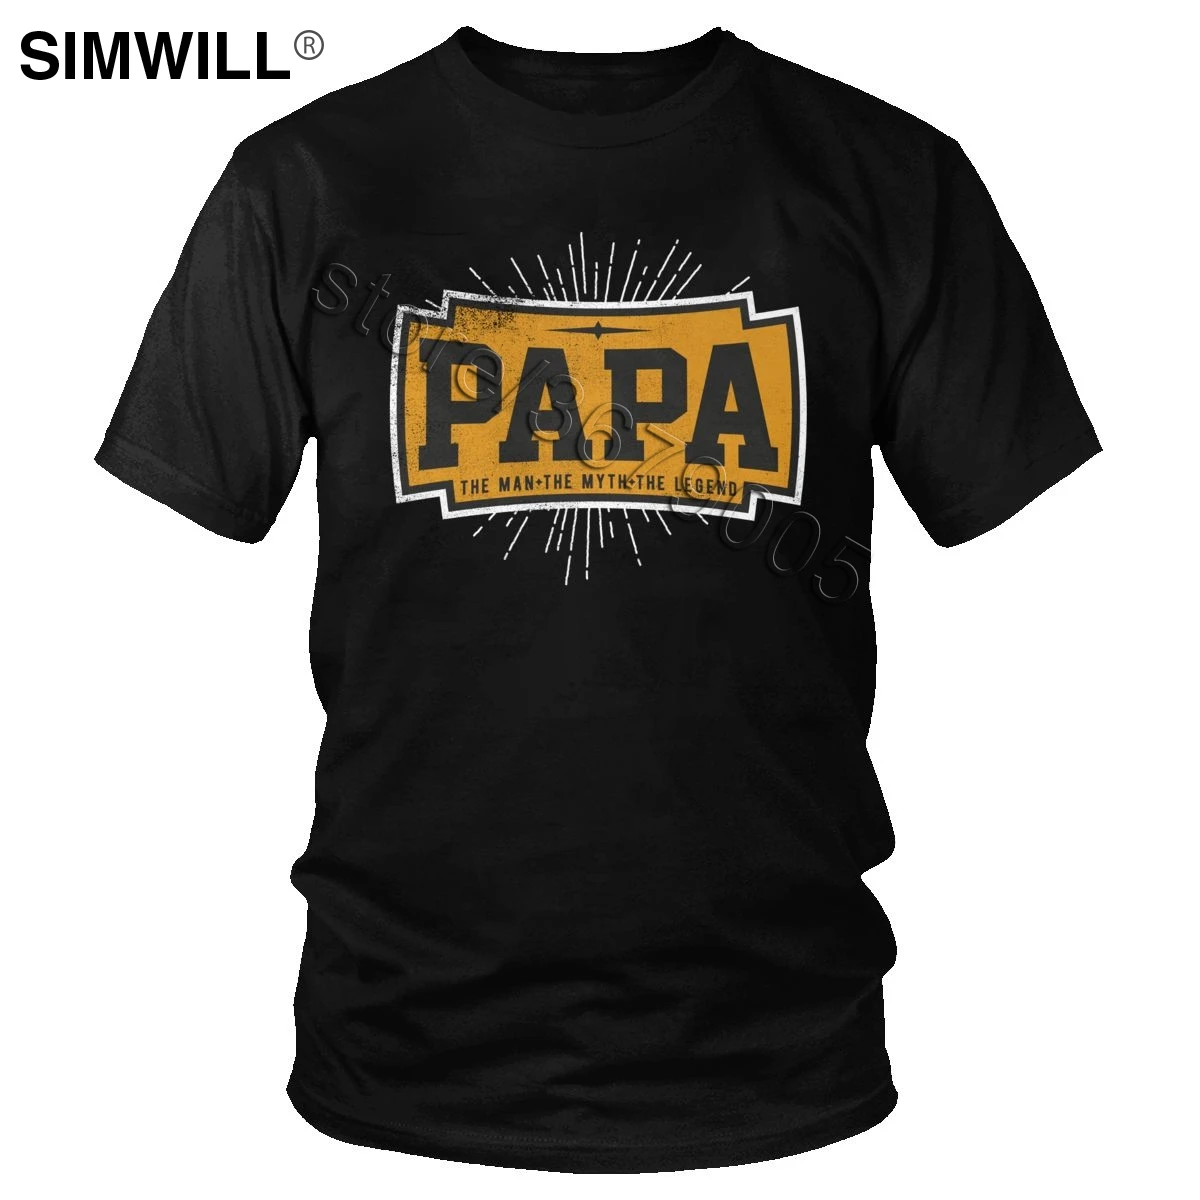 

Vintage Grunge Rock PAPA T shirt The Man The Myth The Legend T-Shirt Short Sleeves Retro Tee Best Gift for Father Dad Apparel